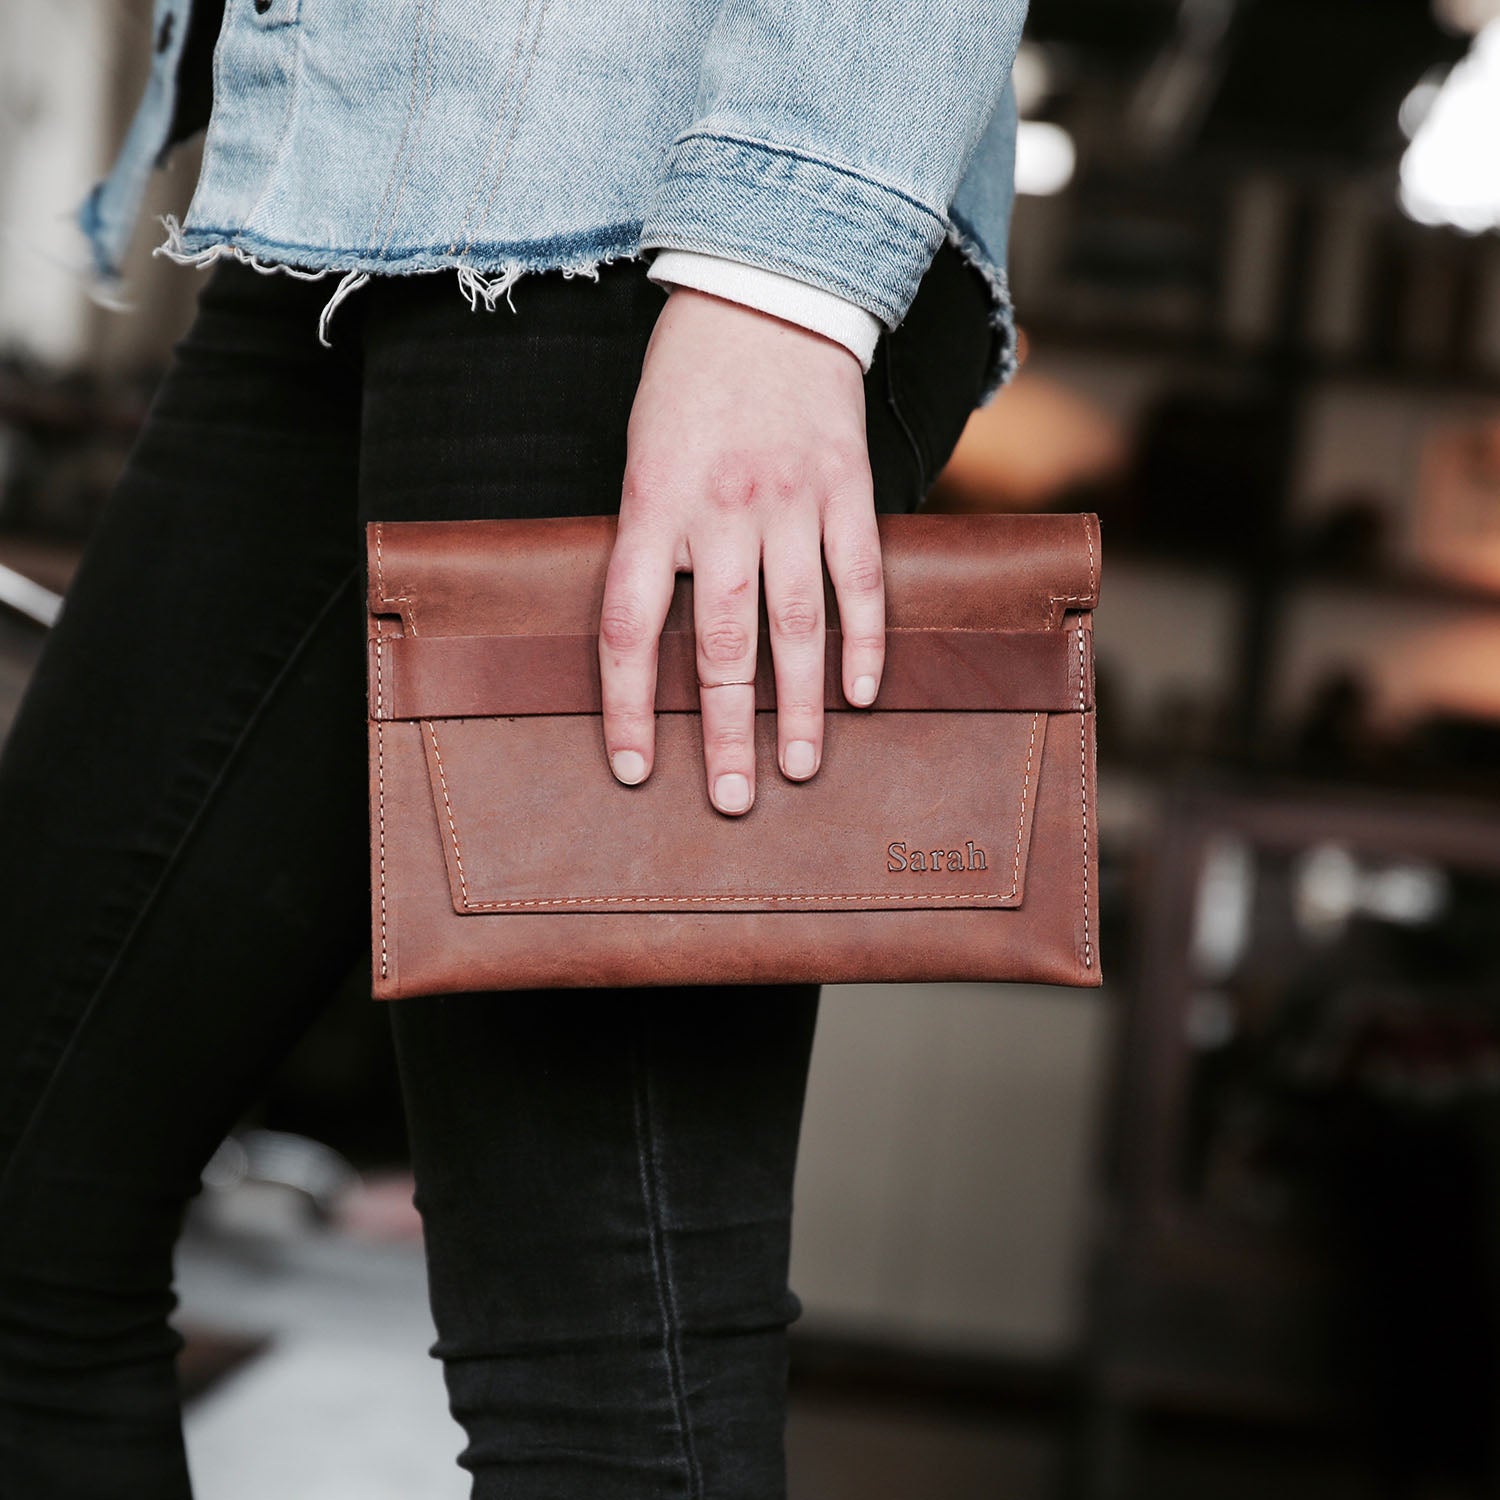 Embossed Leather Clutch Bag